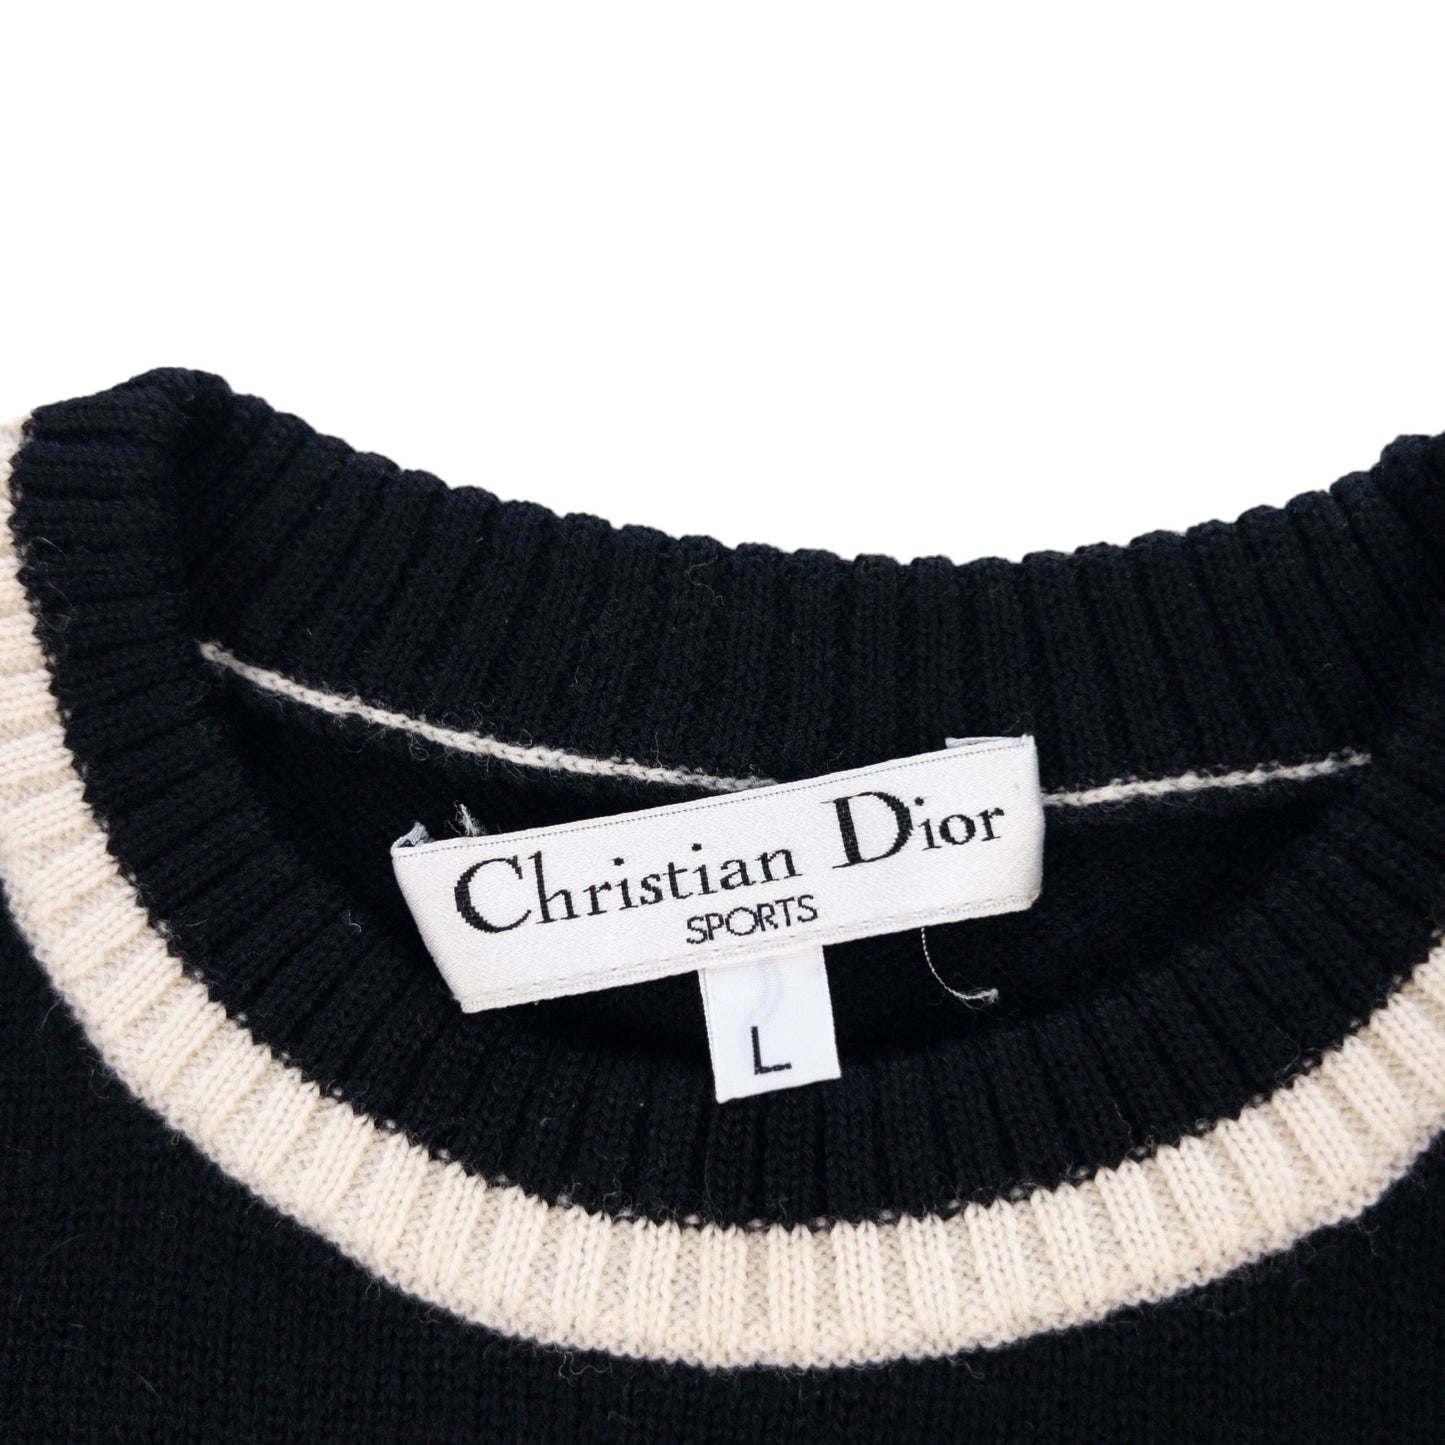 Vintage Christian Dior Sports 100% Wool Knit Jumper Woman's Size S